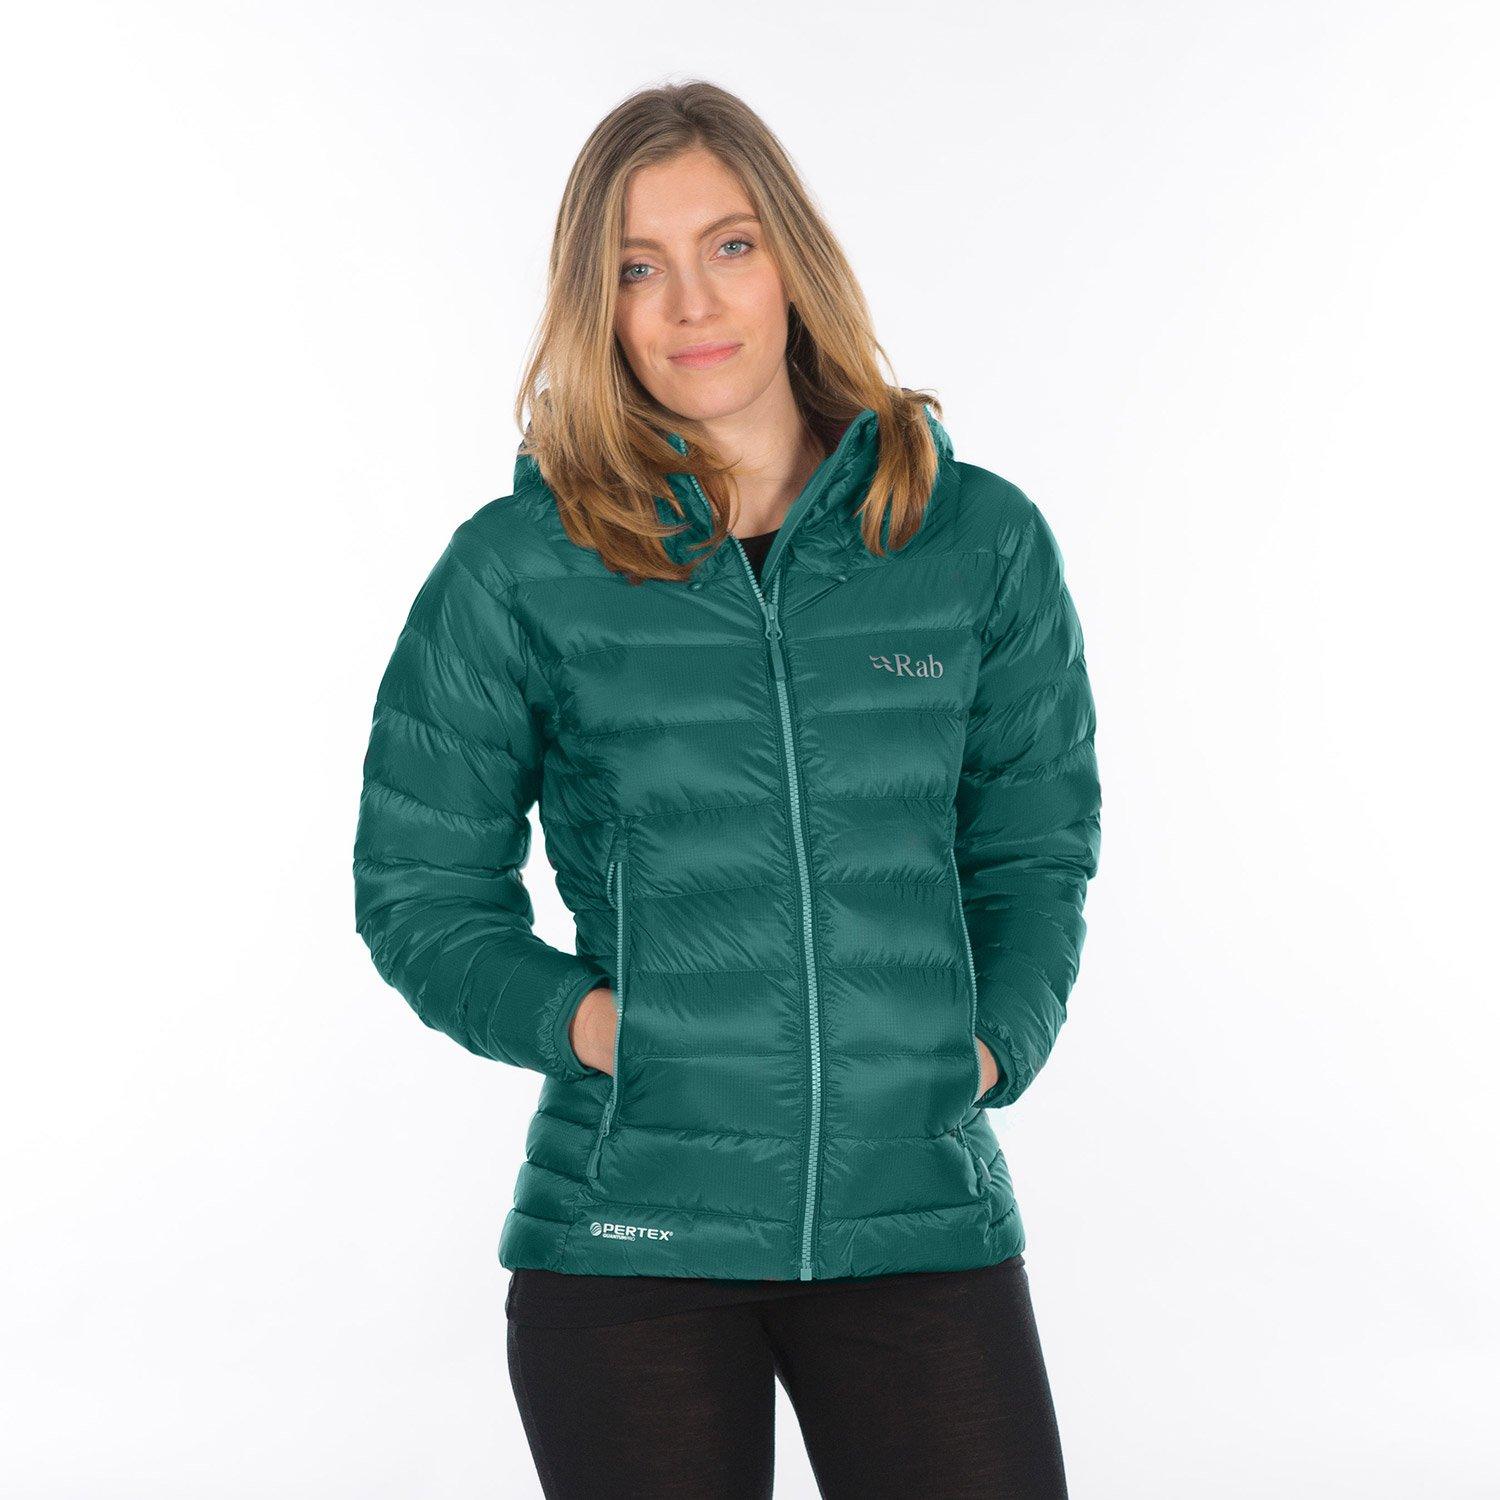 Rab Electron Down Jacket Womens | vlr.eng.br